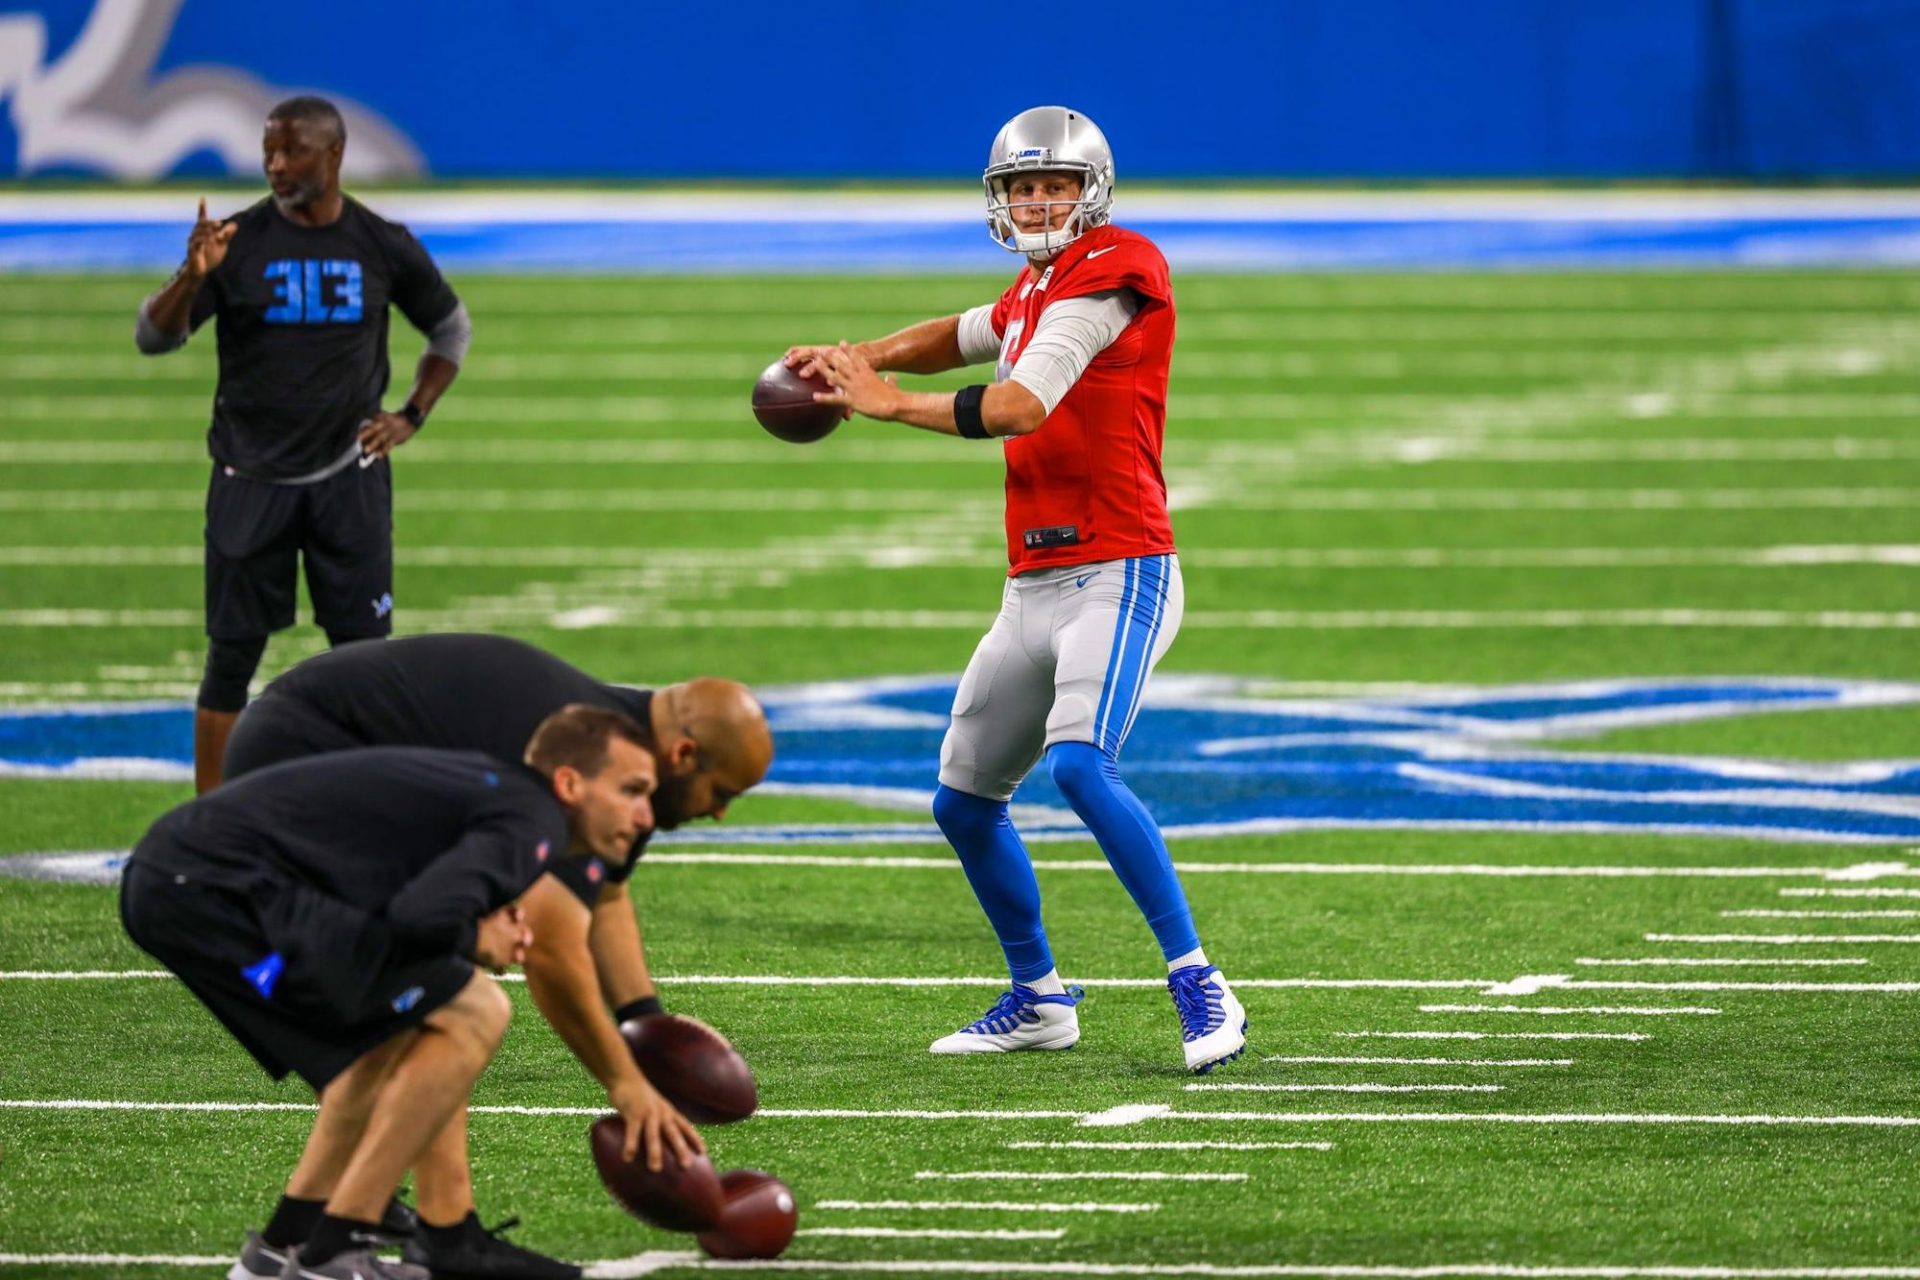 Detroit Lions practising camp observations: Jared Goff throws 3 touchdowns in scrimmage